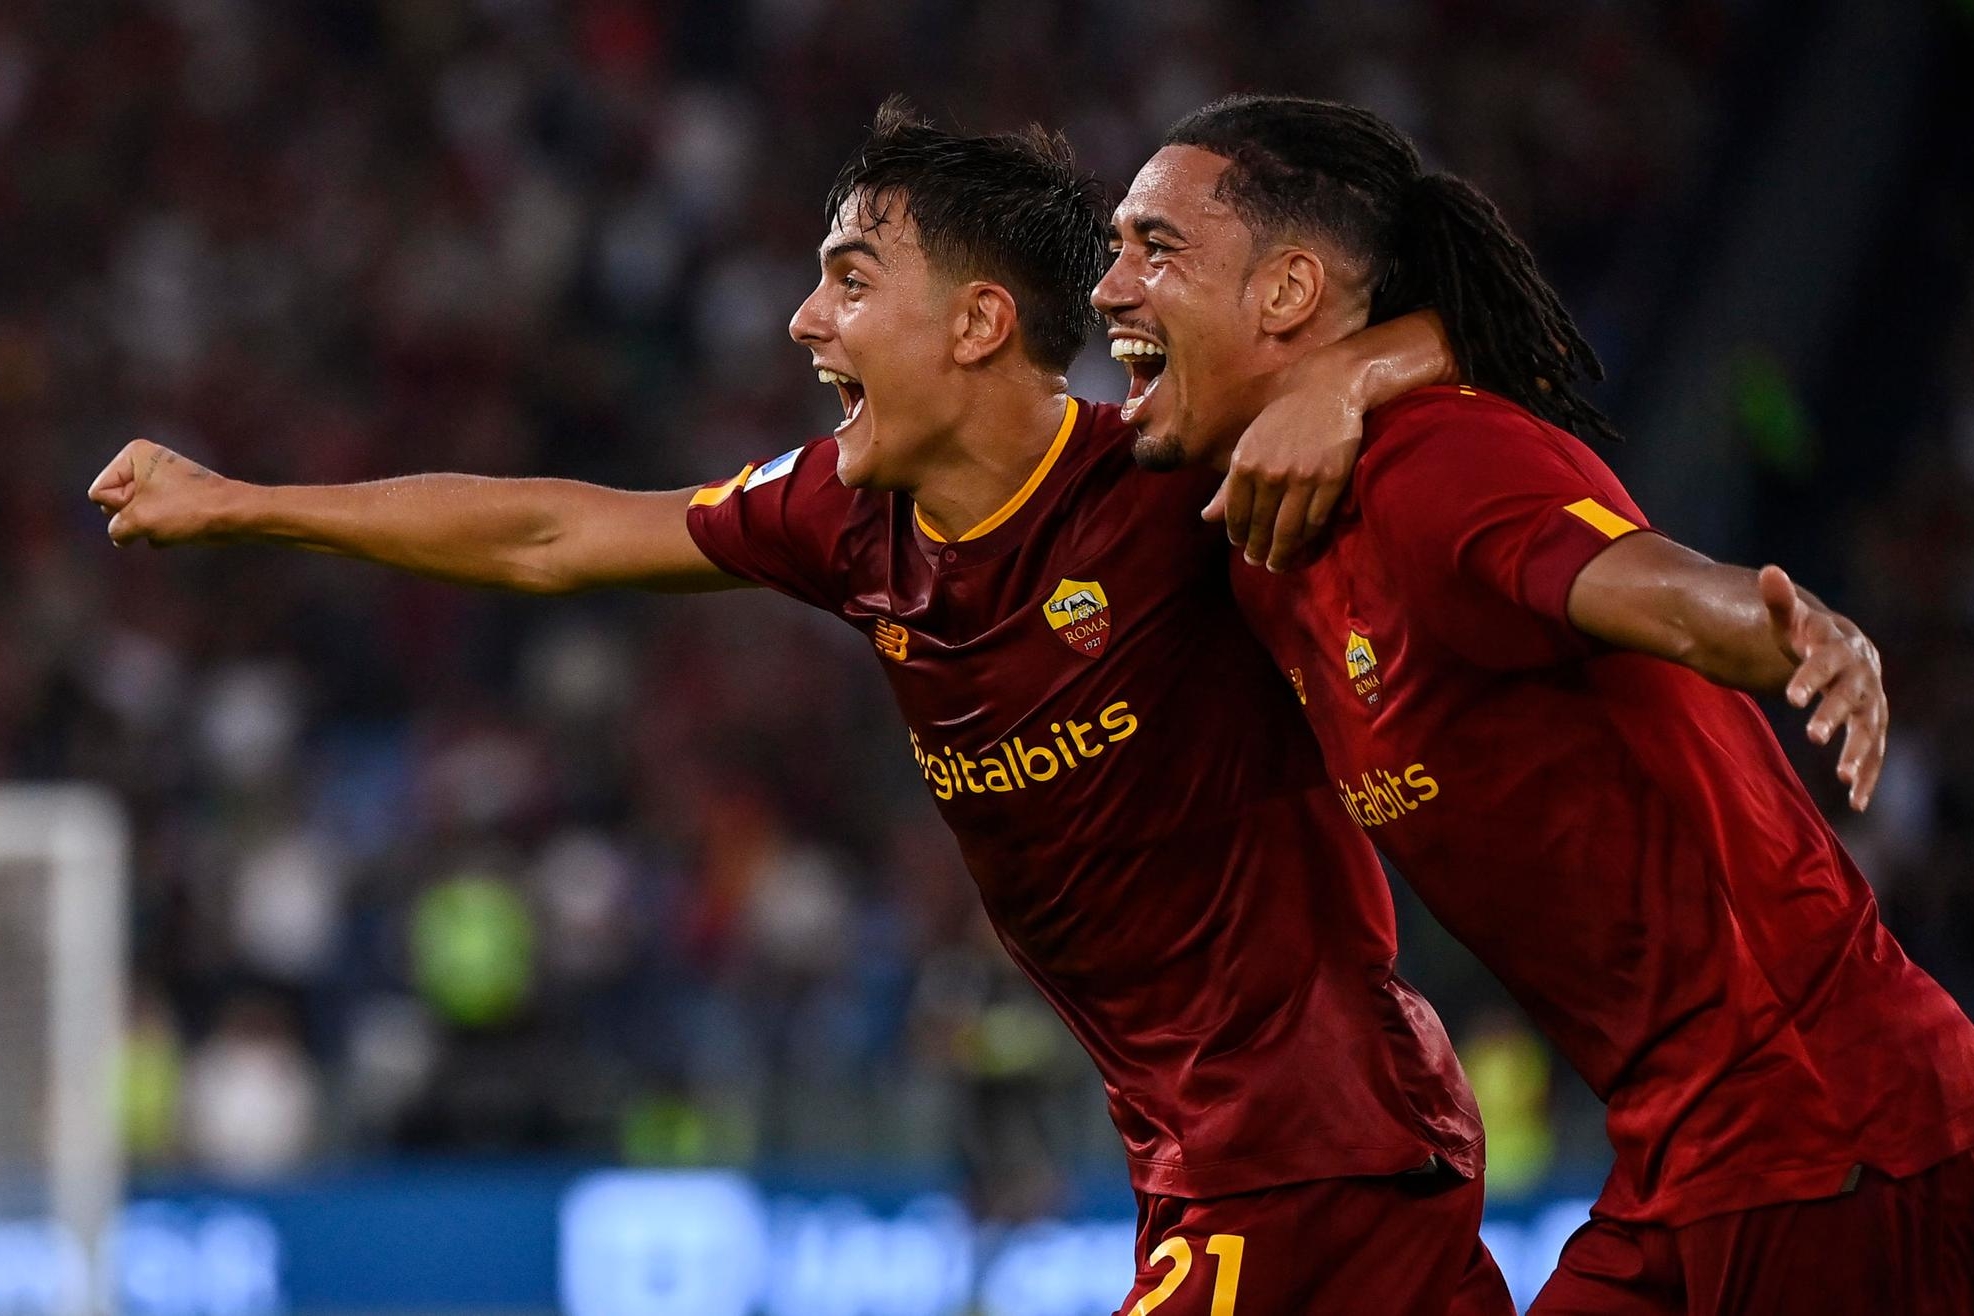 RomaÕs Chris Smalling (R) celebrates his goal with RomaÕs Paulo Dybala (L) during the Serie A soccer match between AS Roma and US Cremonese at the Olimpico stadium in Rome, Italy, 22 August 2022. ANSA/RICCARDO ANTIMIANI